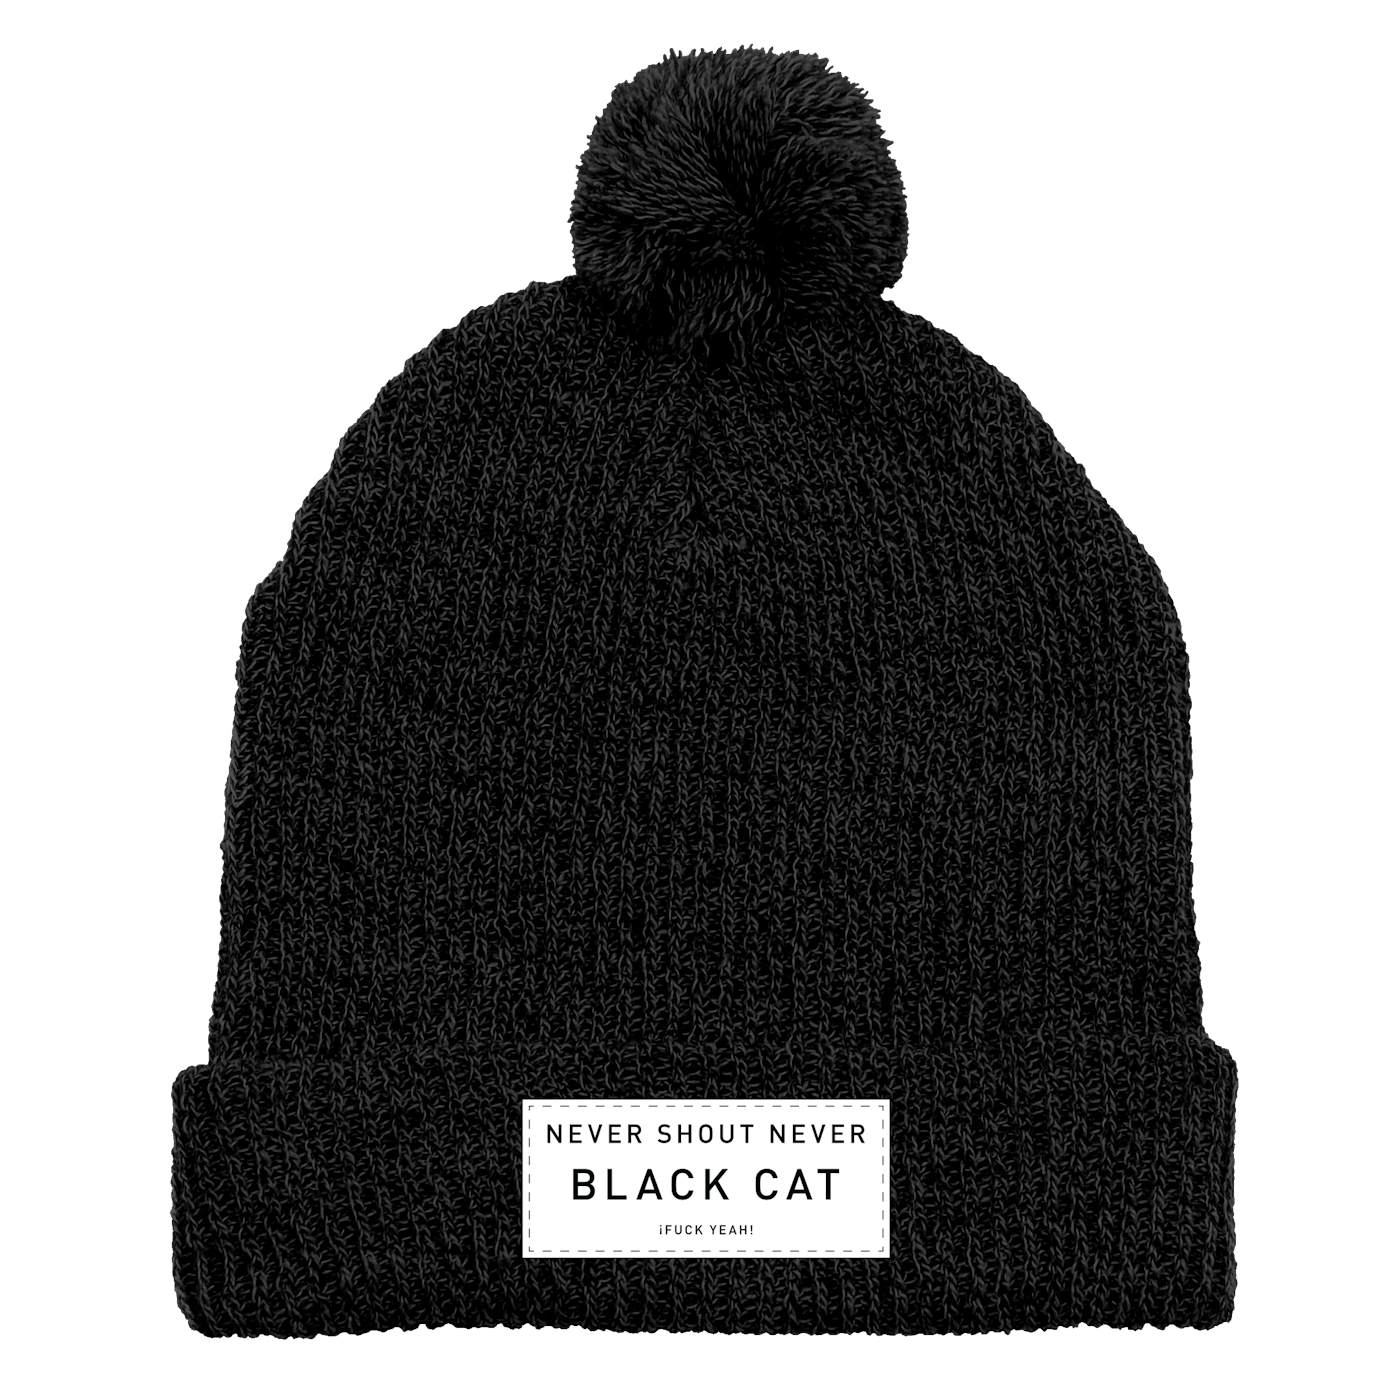 Never Shout Never Black Cat F Yeah Label Pom Beanie